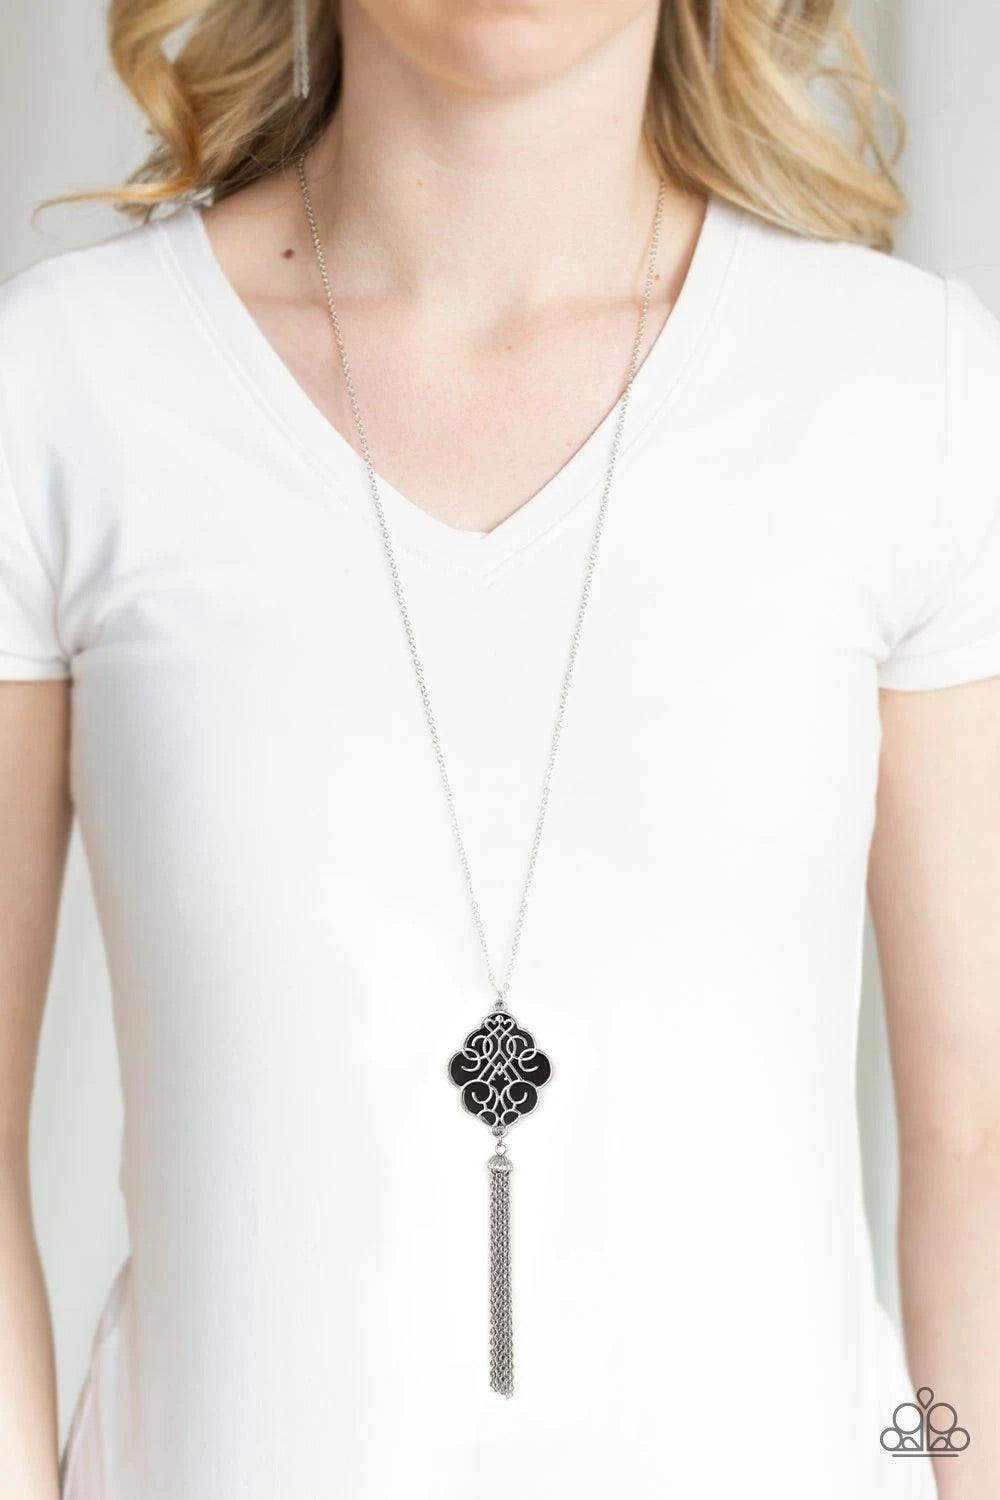 Paparazzi Accessories Malibu Mandala - Black Shimmery silver filigree swirls across a shiny black backdrop, coalescing into a colorful pendant. A glistening silver chain tassel swings from the bottom of the pendant for a whimsical finish. Features an adju